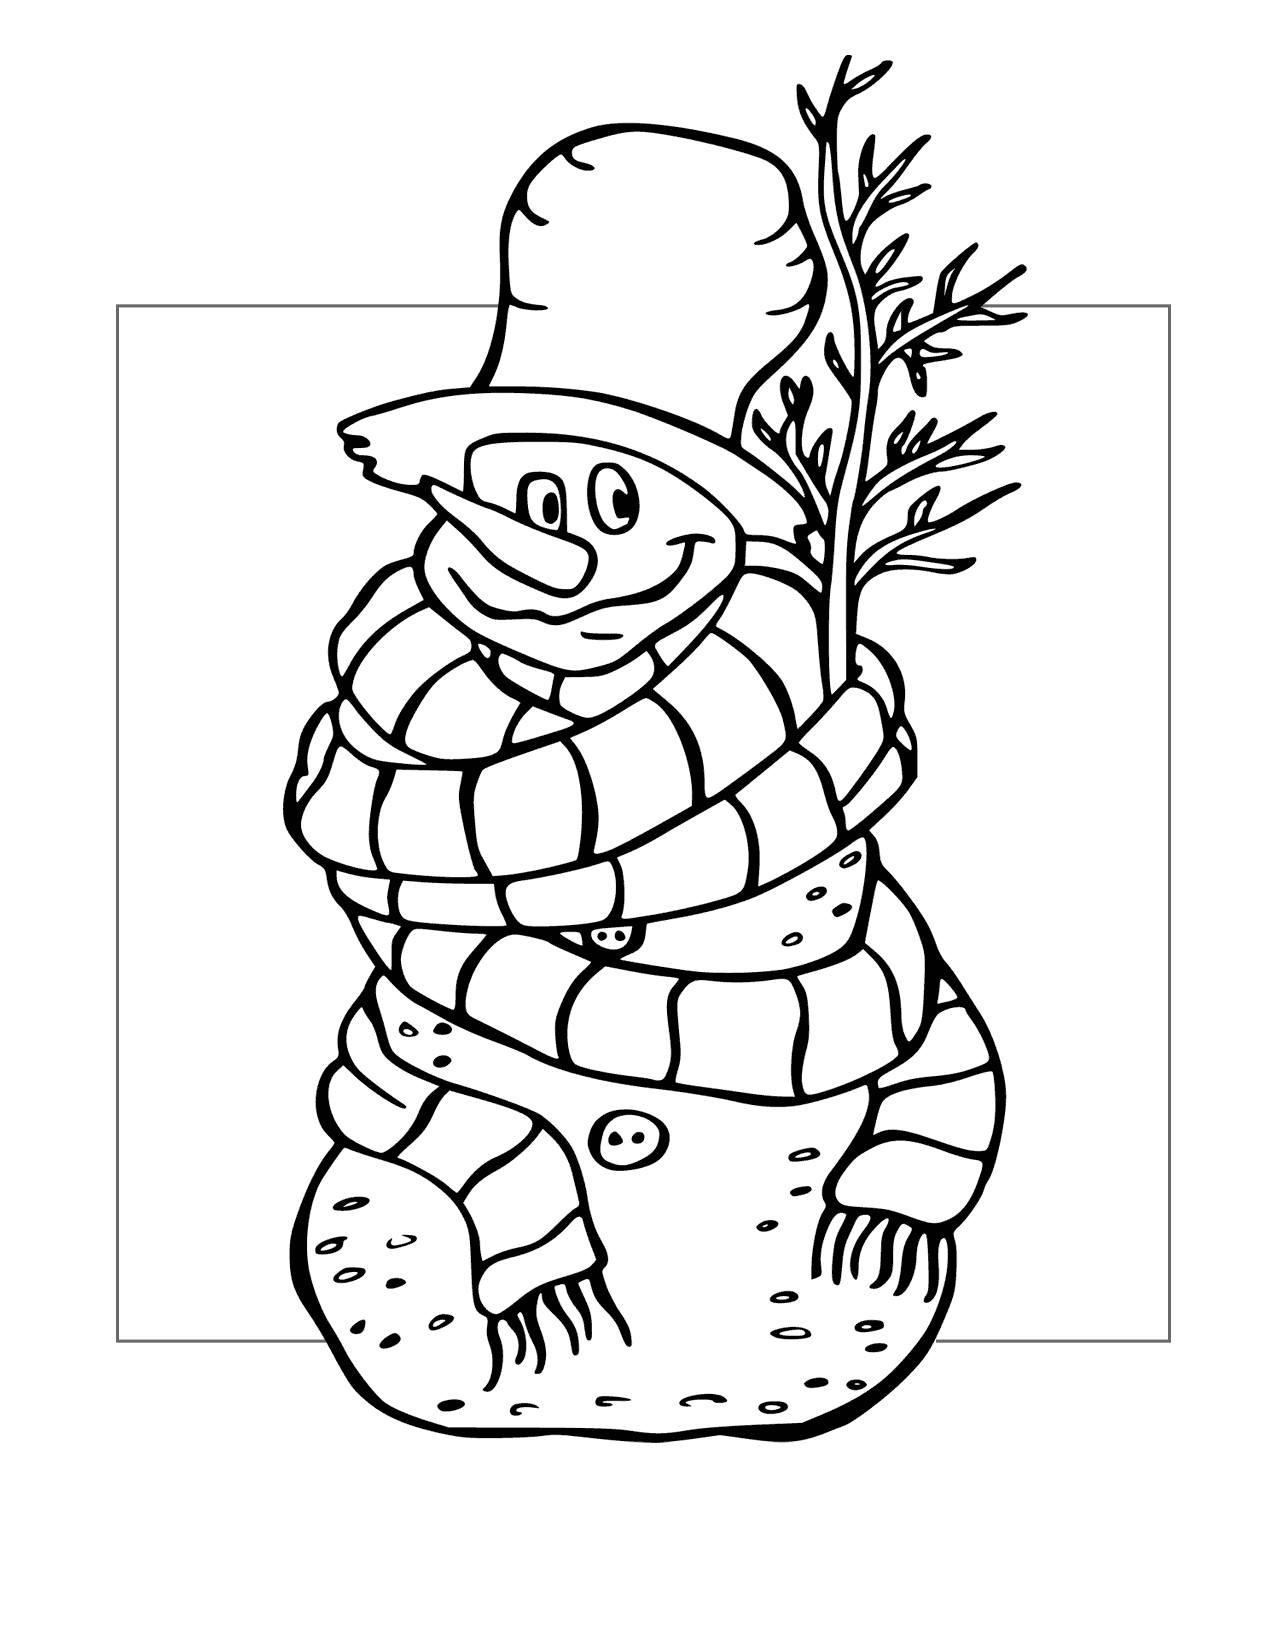 Cute Christmas Snowman Coloring Page